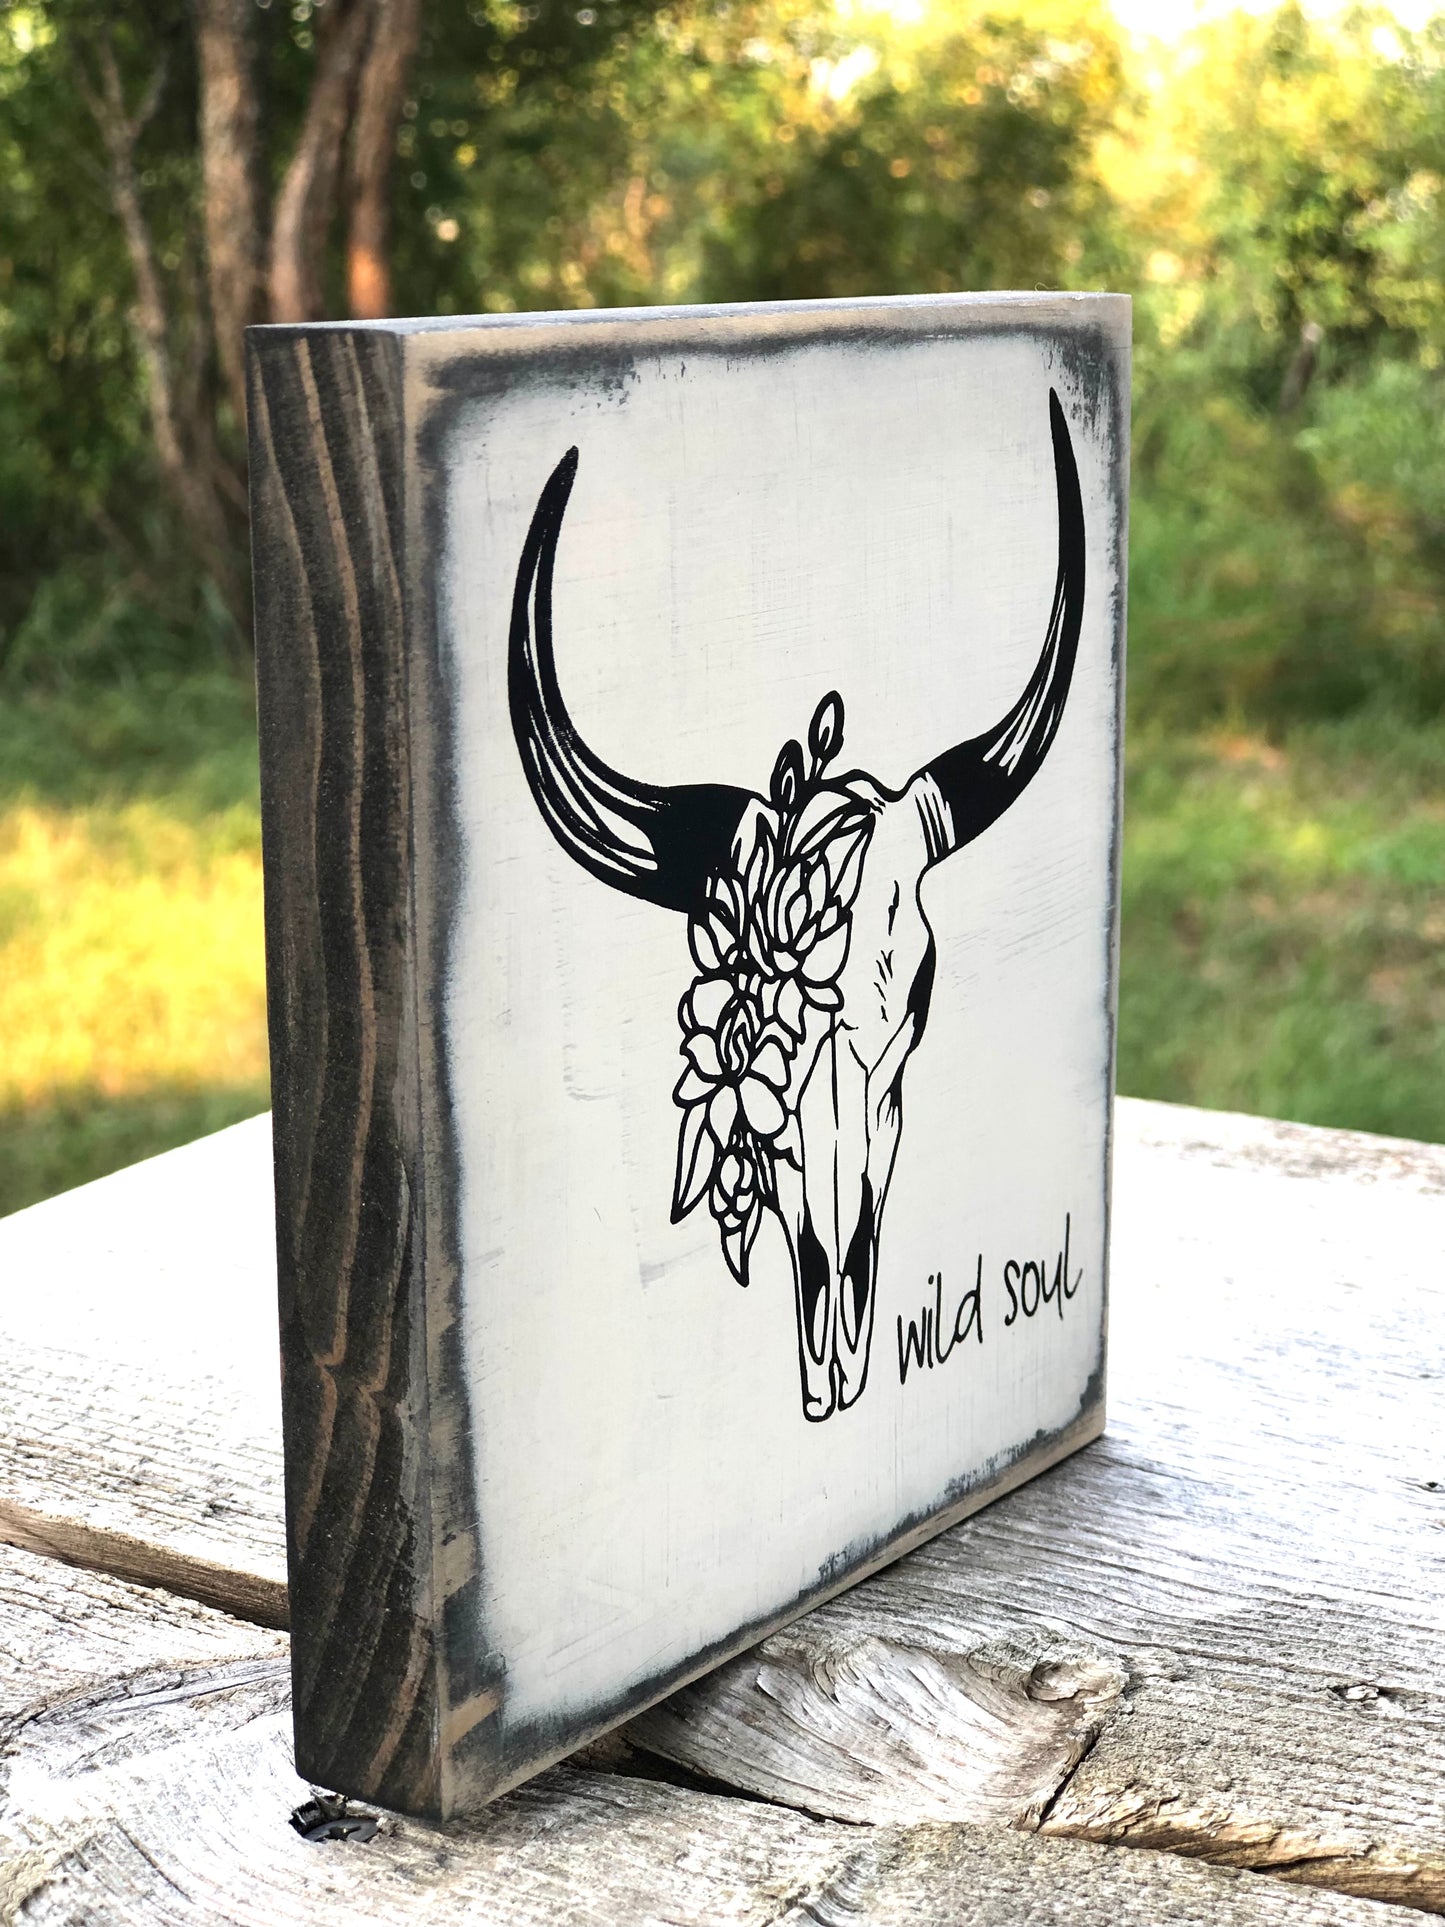 COW SKULL WITH FLOWERS WILD SOUL -WOOD SIGN